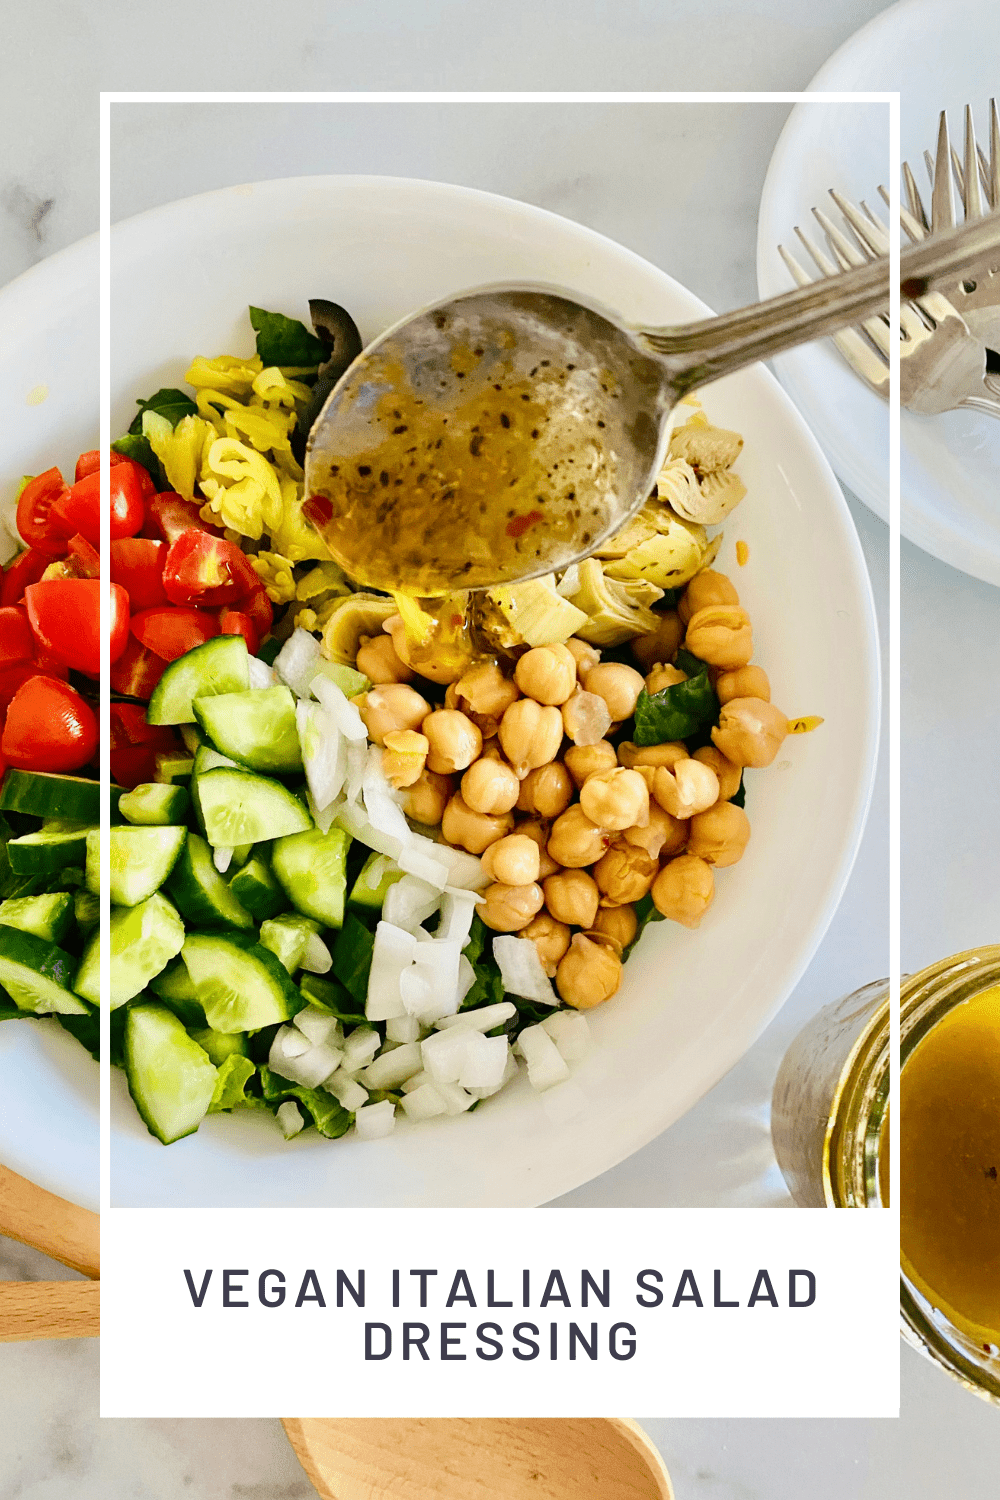 Spoon drizzling dressing over a salad with cucumbers, tomatoes, garbanzo beans, and more. 